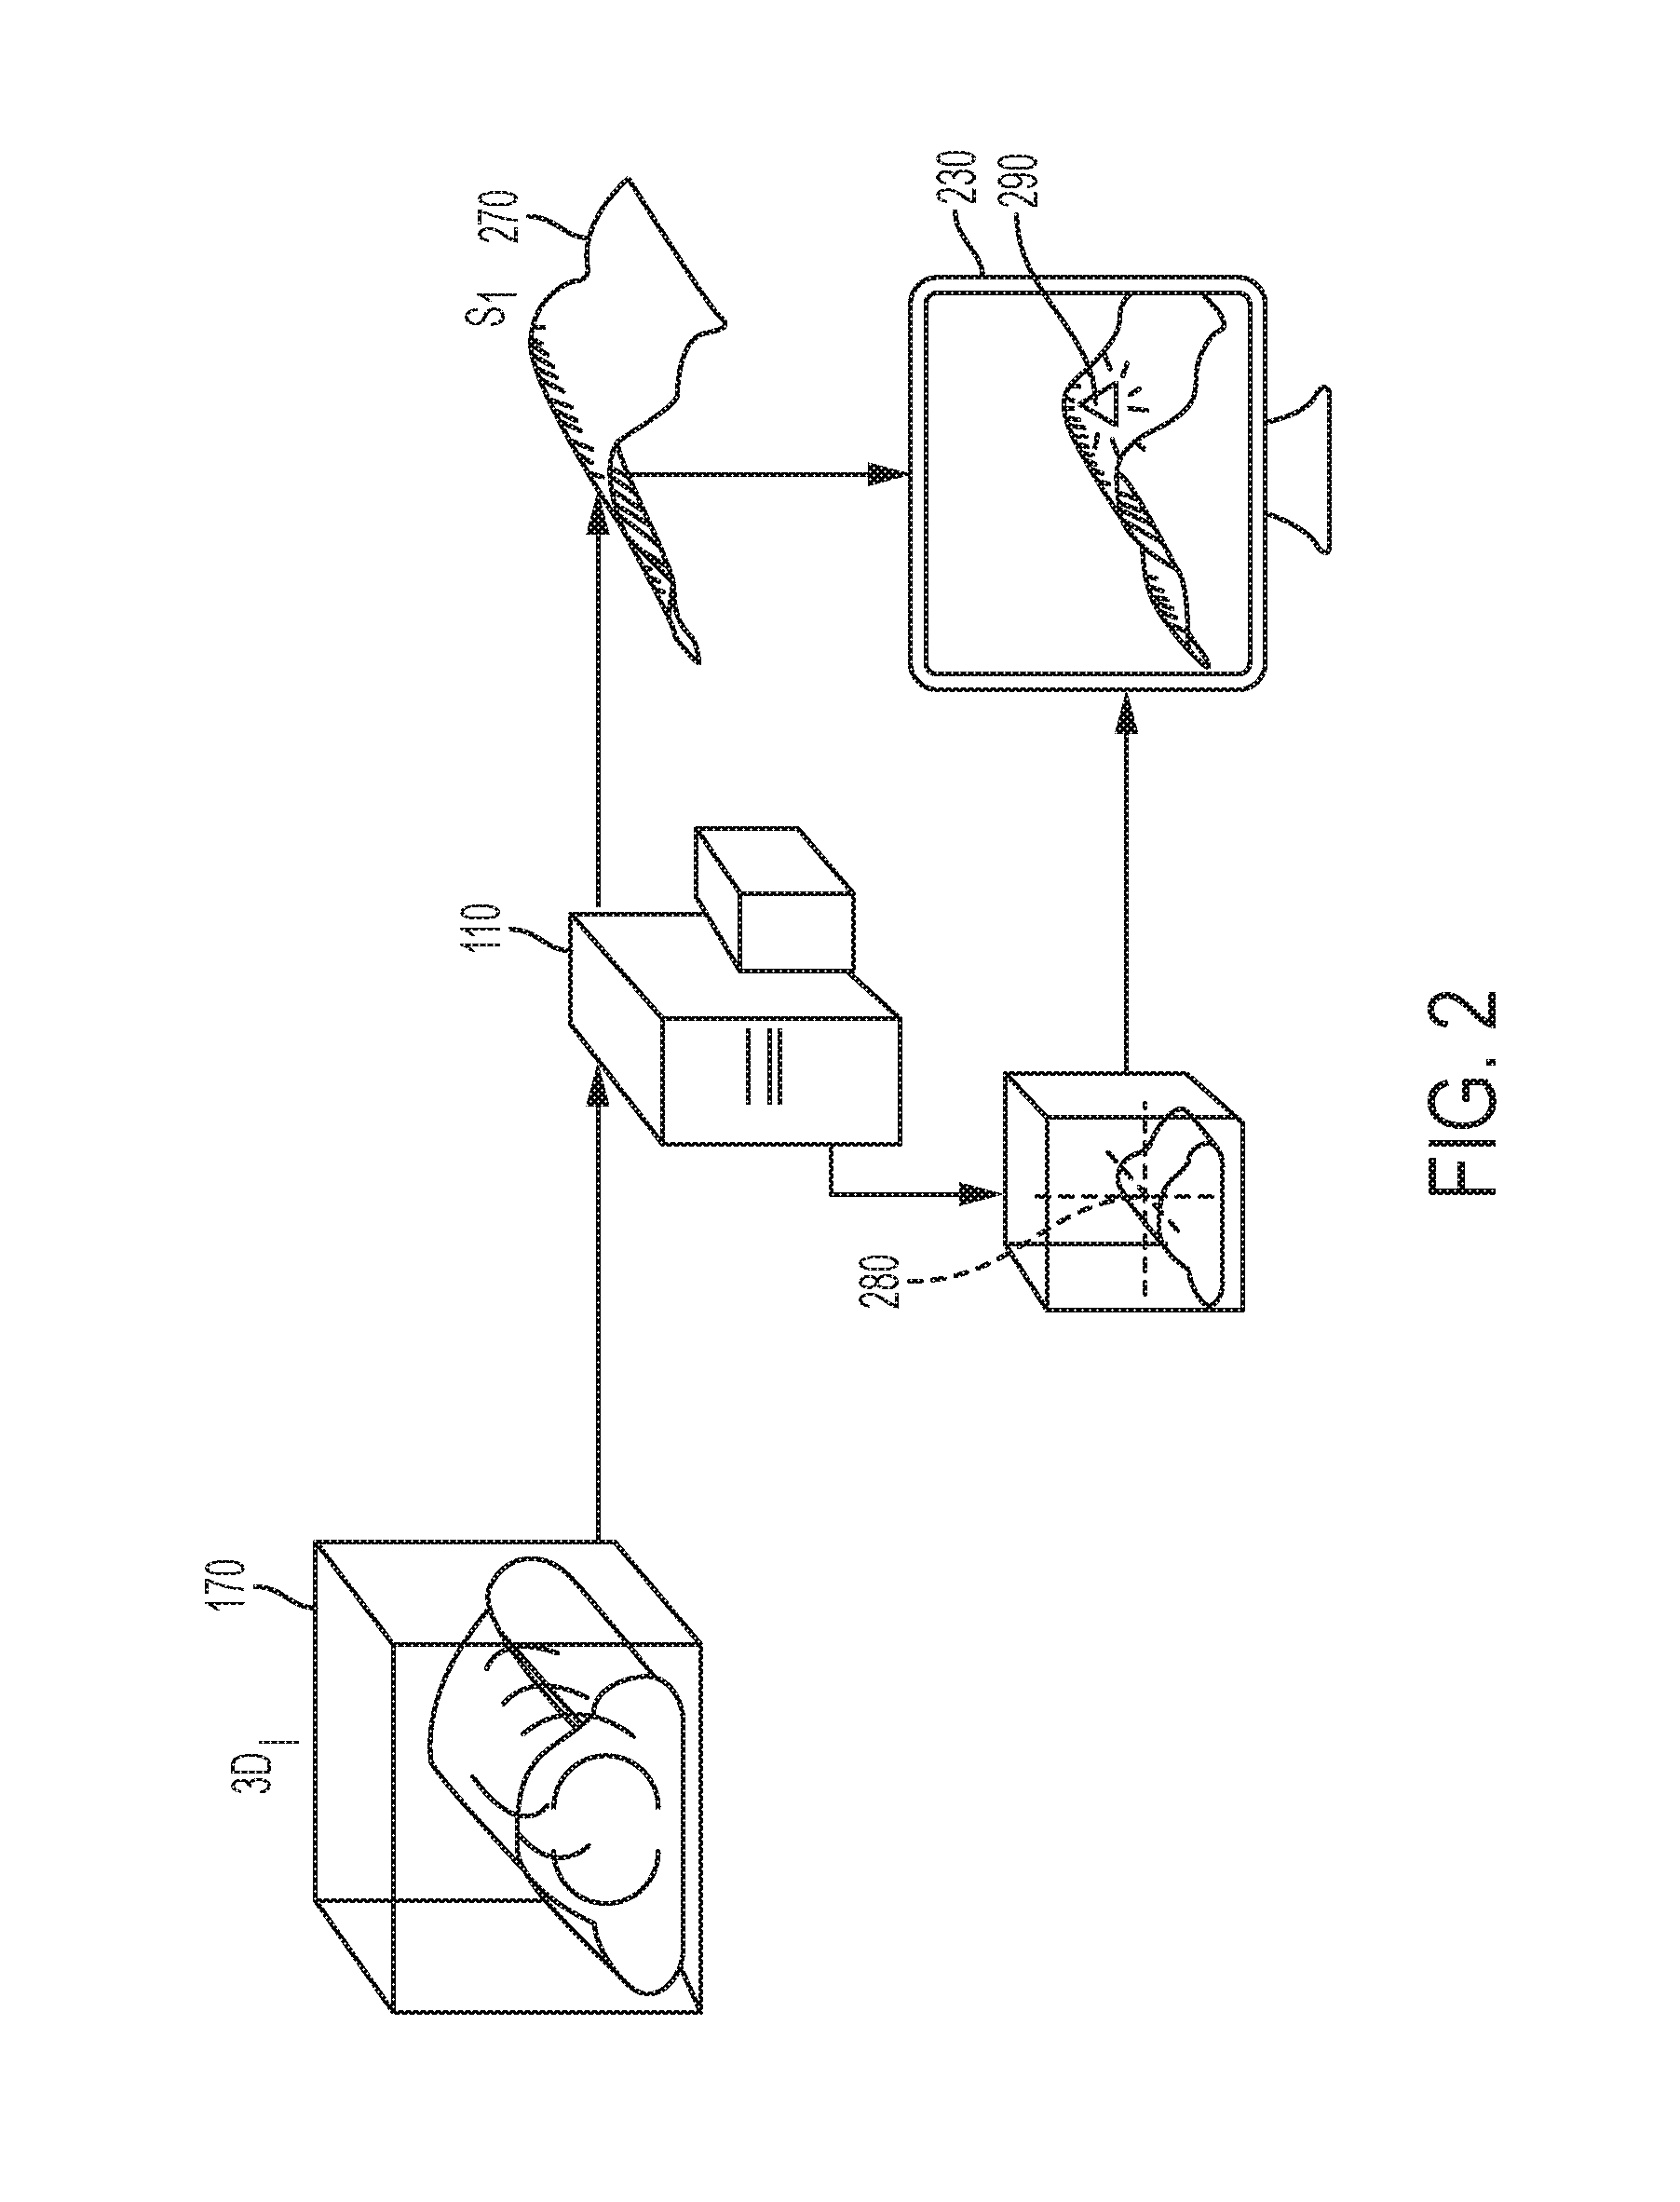 System and method for fused image based navigation with late marker placement